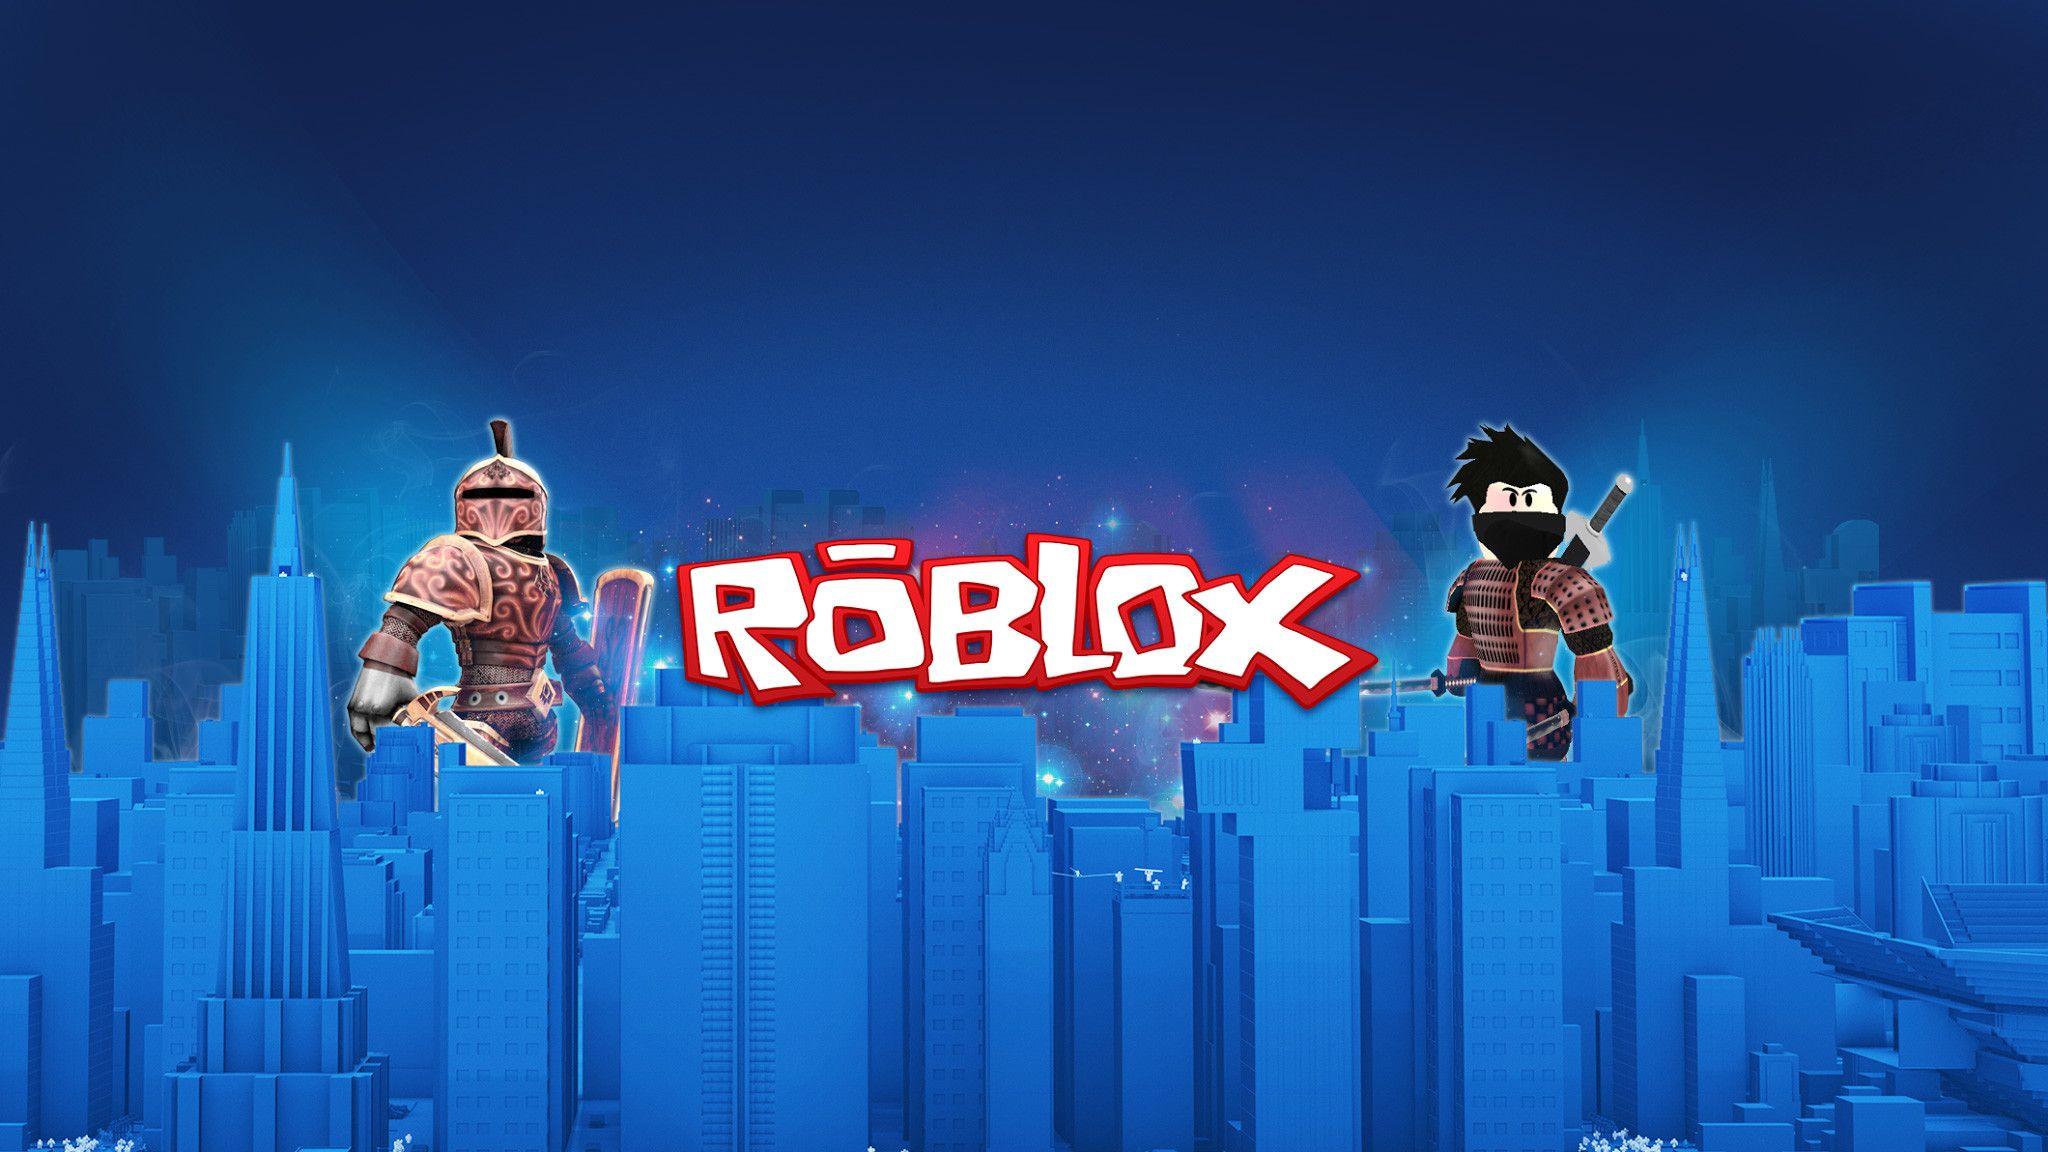 Cute Roblox Wallpapers Top Free Cute Roblox Backgrounds Wallpaperaccess - free download roblox wallpaper roblox 1280x800 for your cheat